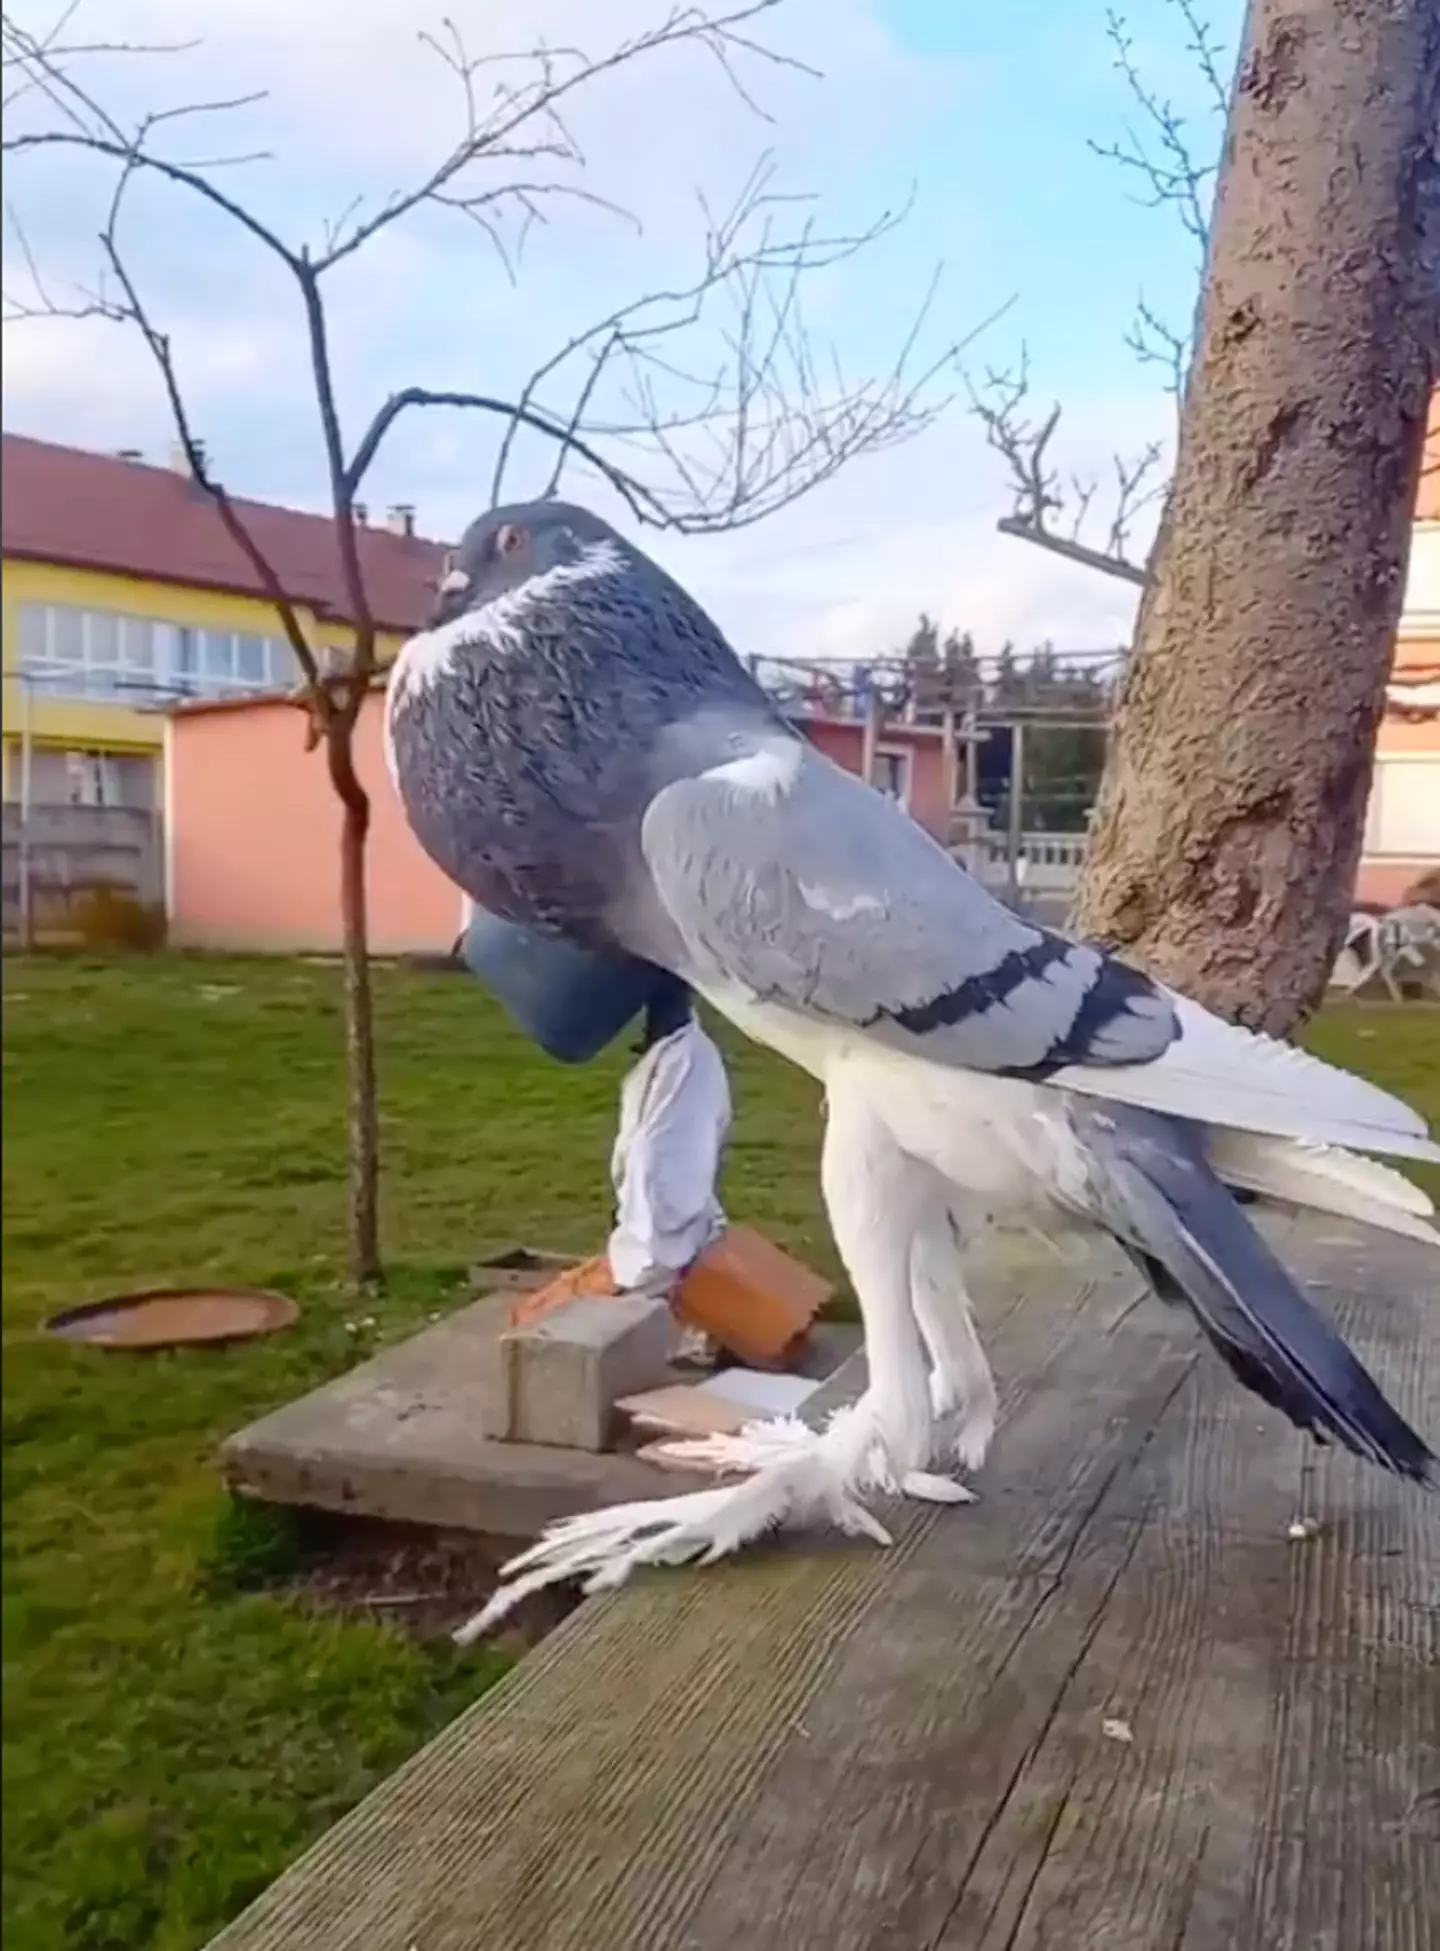 This unit of a pigeon has left people 'disturbed'.